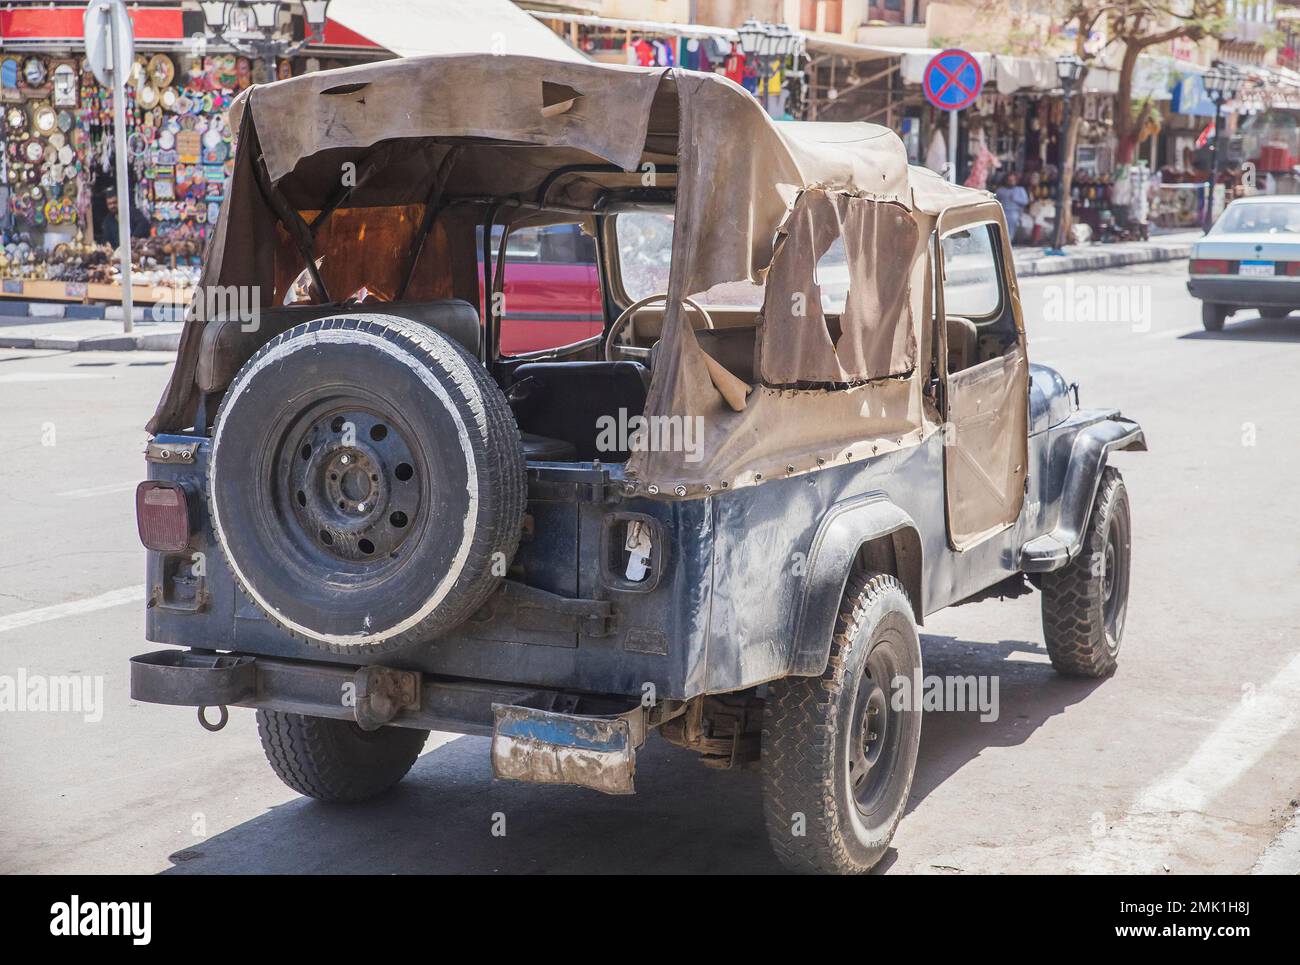 old police SUV with a leaky roof in Egypt Stock Photo